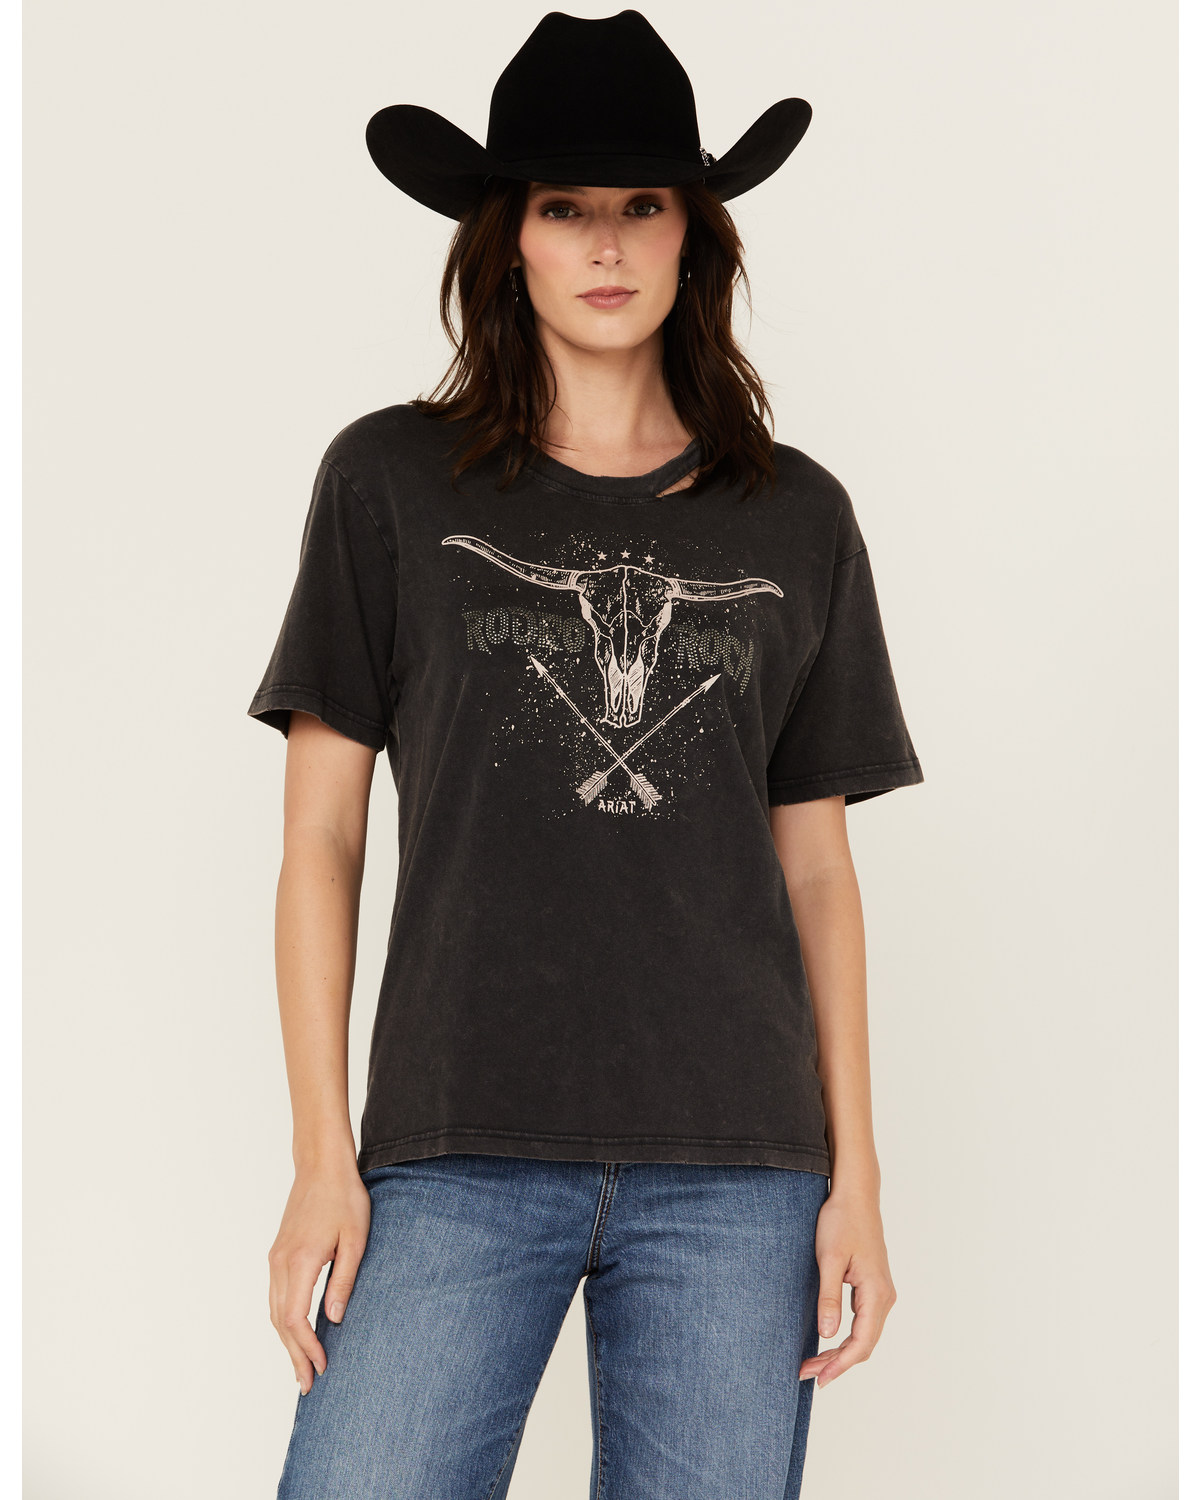 Ariat Women's Rock N' Rodeo Embellished Short Sleeve Graphic Tee